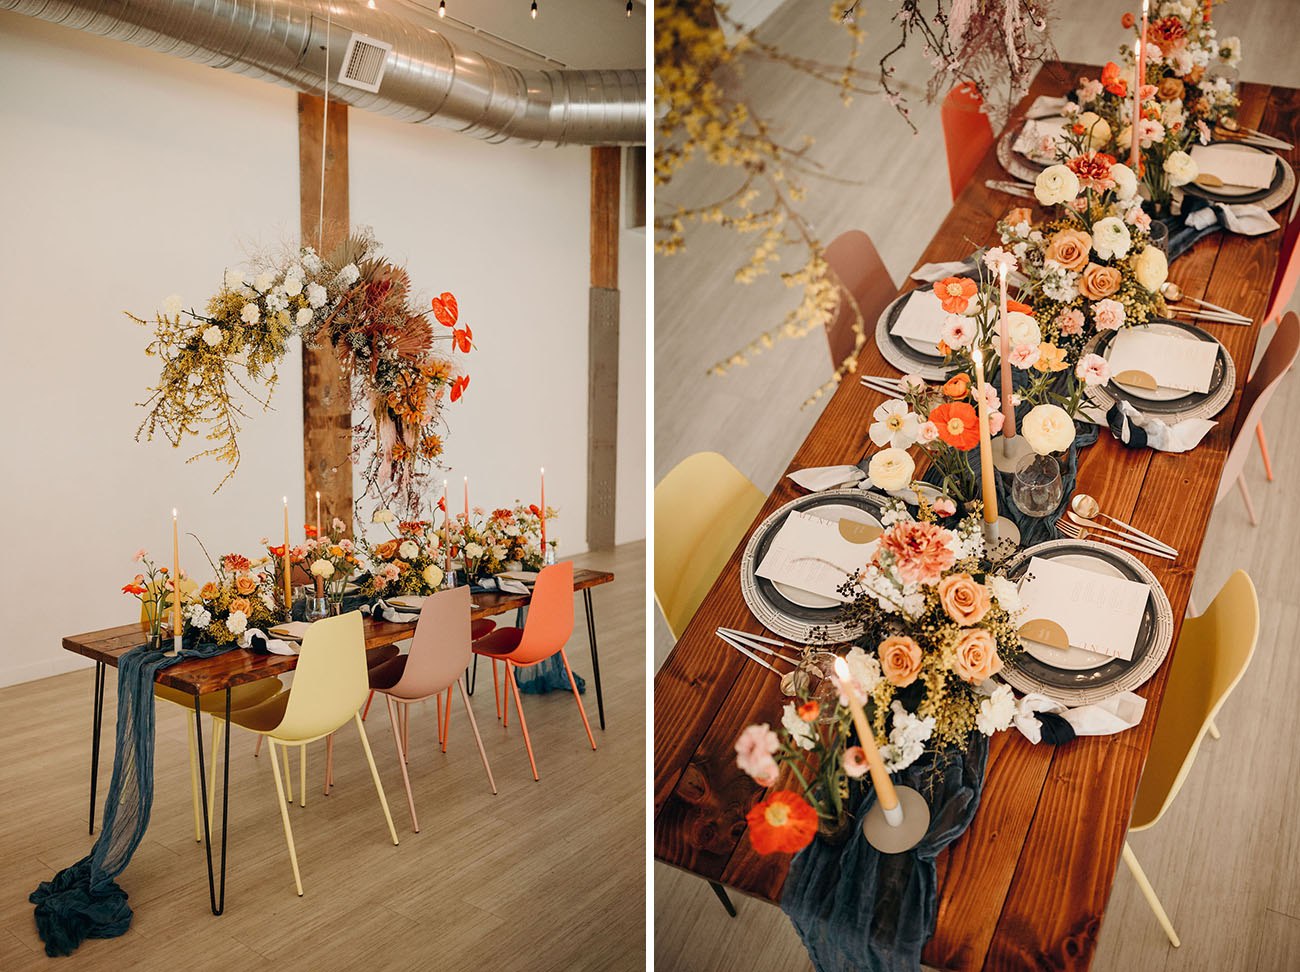 The wedding florals were done in blush and mustard, with colored candles and some metallic chargers